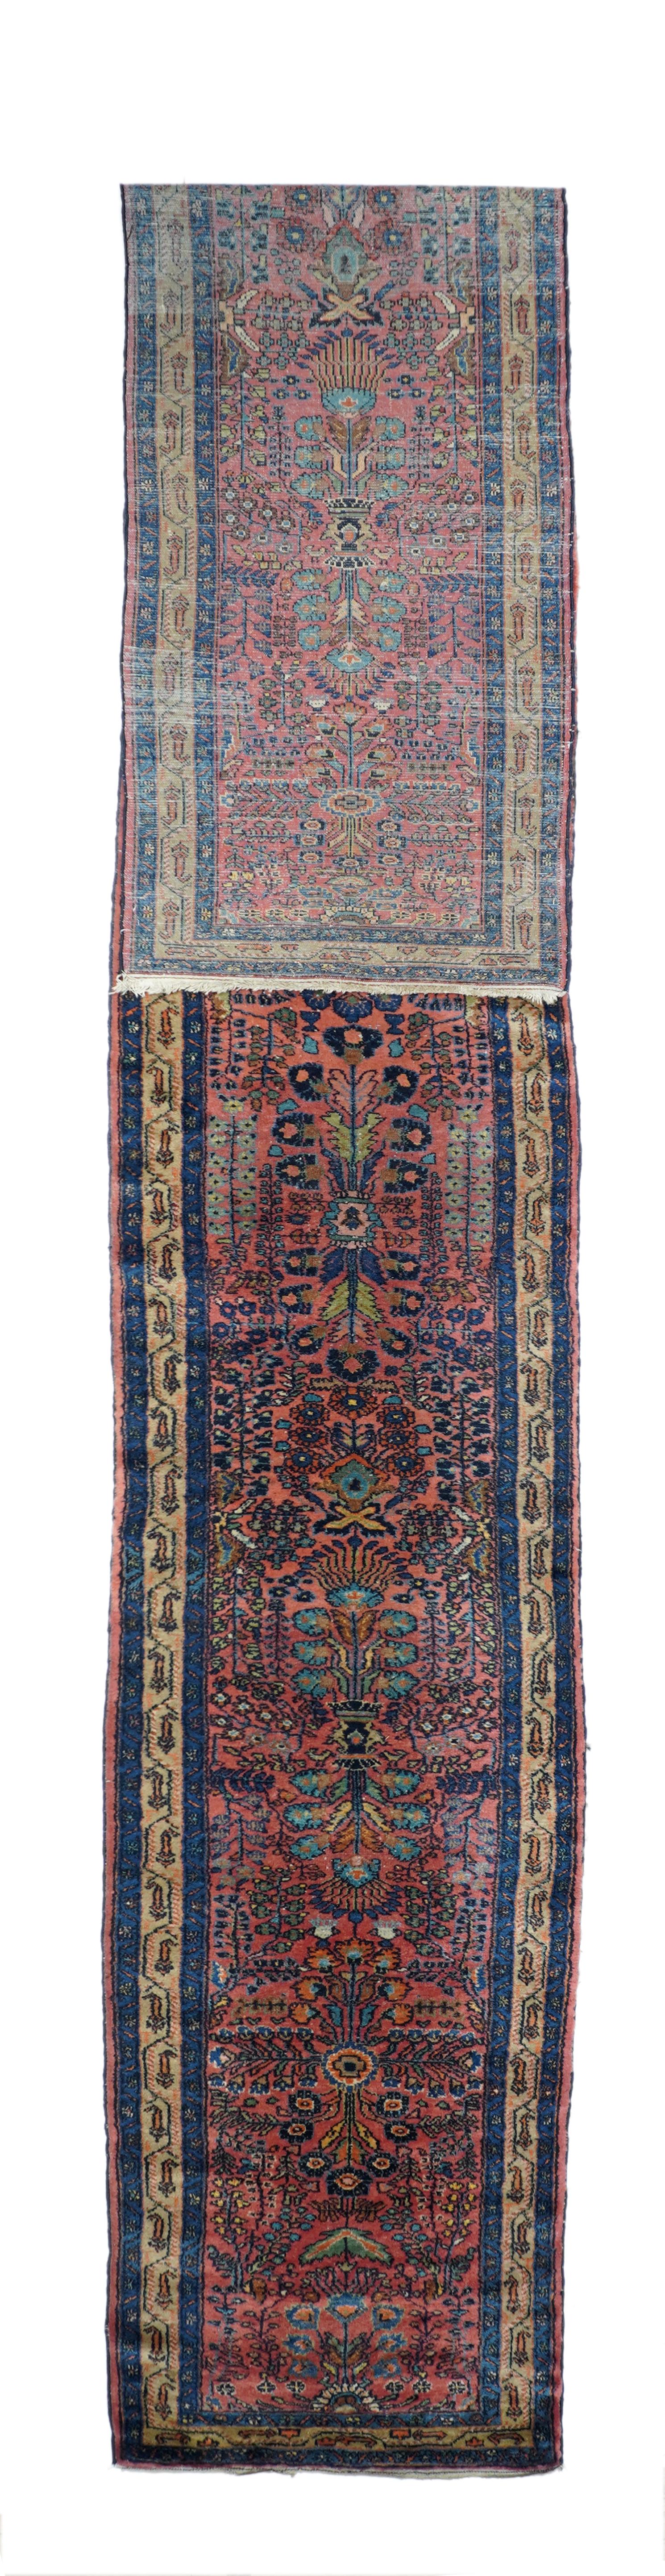 Antique Lilihan Runner. Usefully narrow with a soft rose field that goes on seemingly forever. Detached floral spray pattern. Ecru main border with a boteh meander. Length adjustable if desired. Moderate weave. Cotton foundation, good condition.